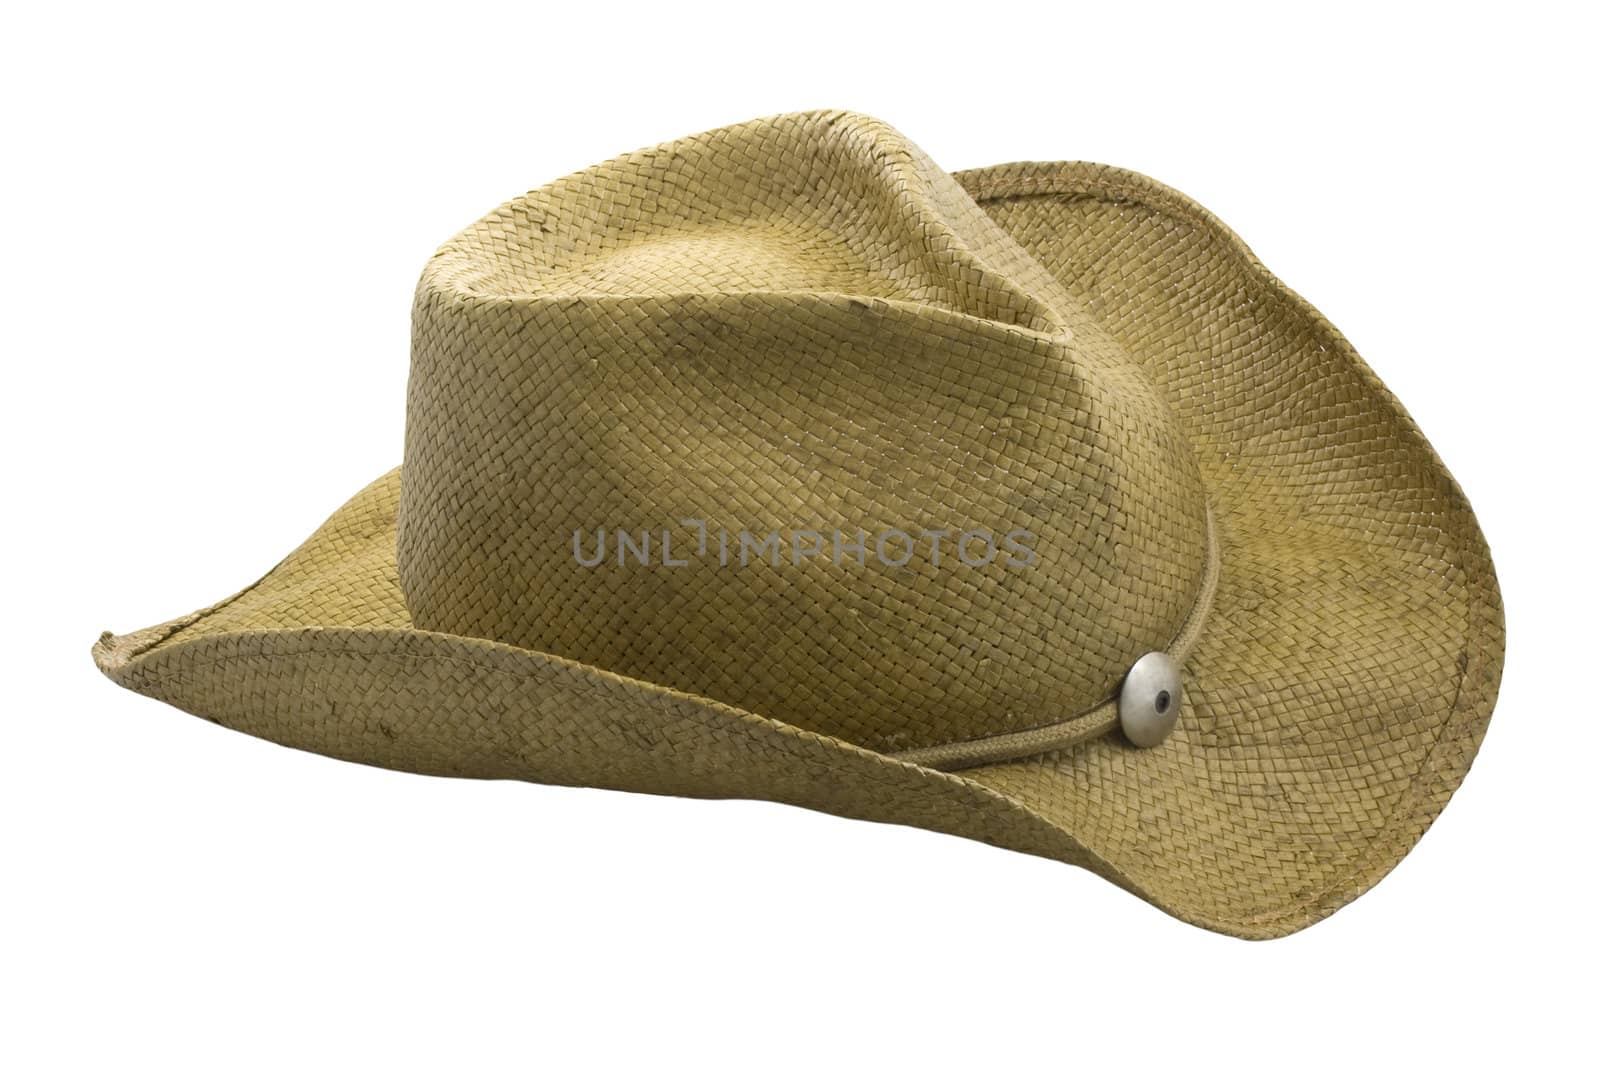 western style straw hat isolated on white. clipping path included